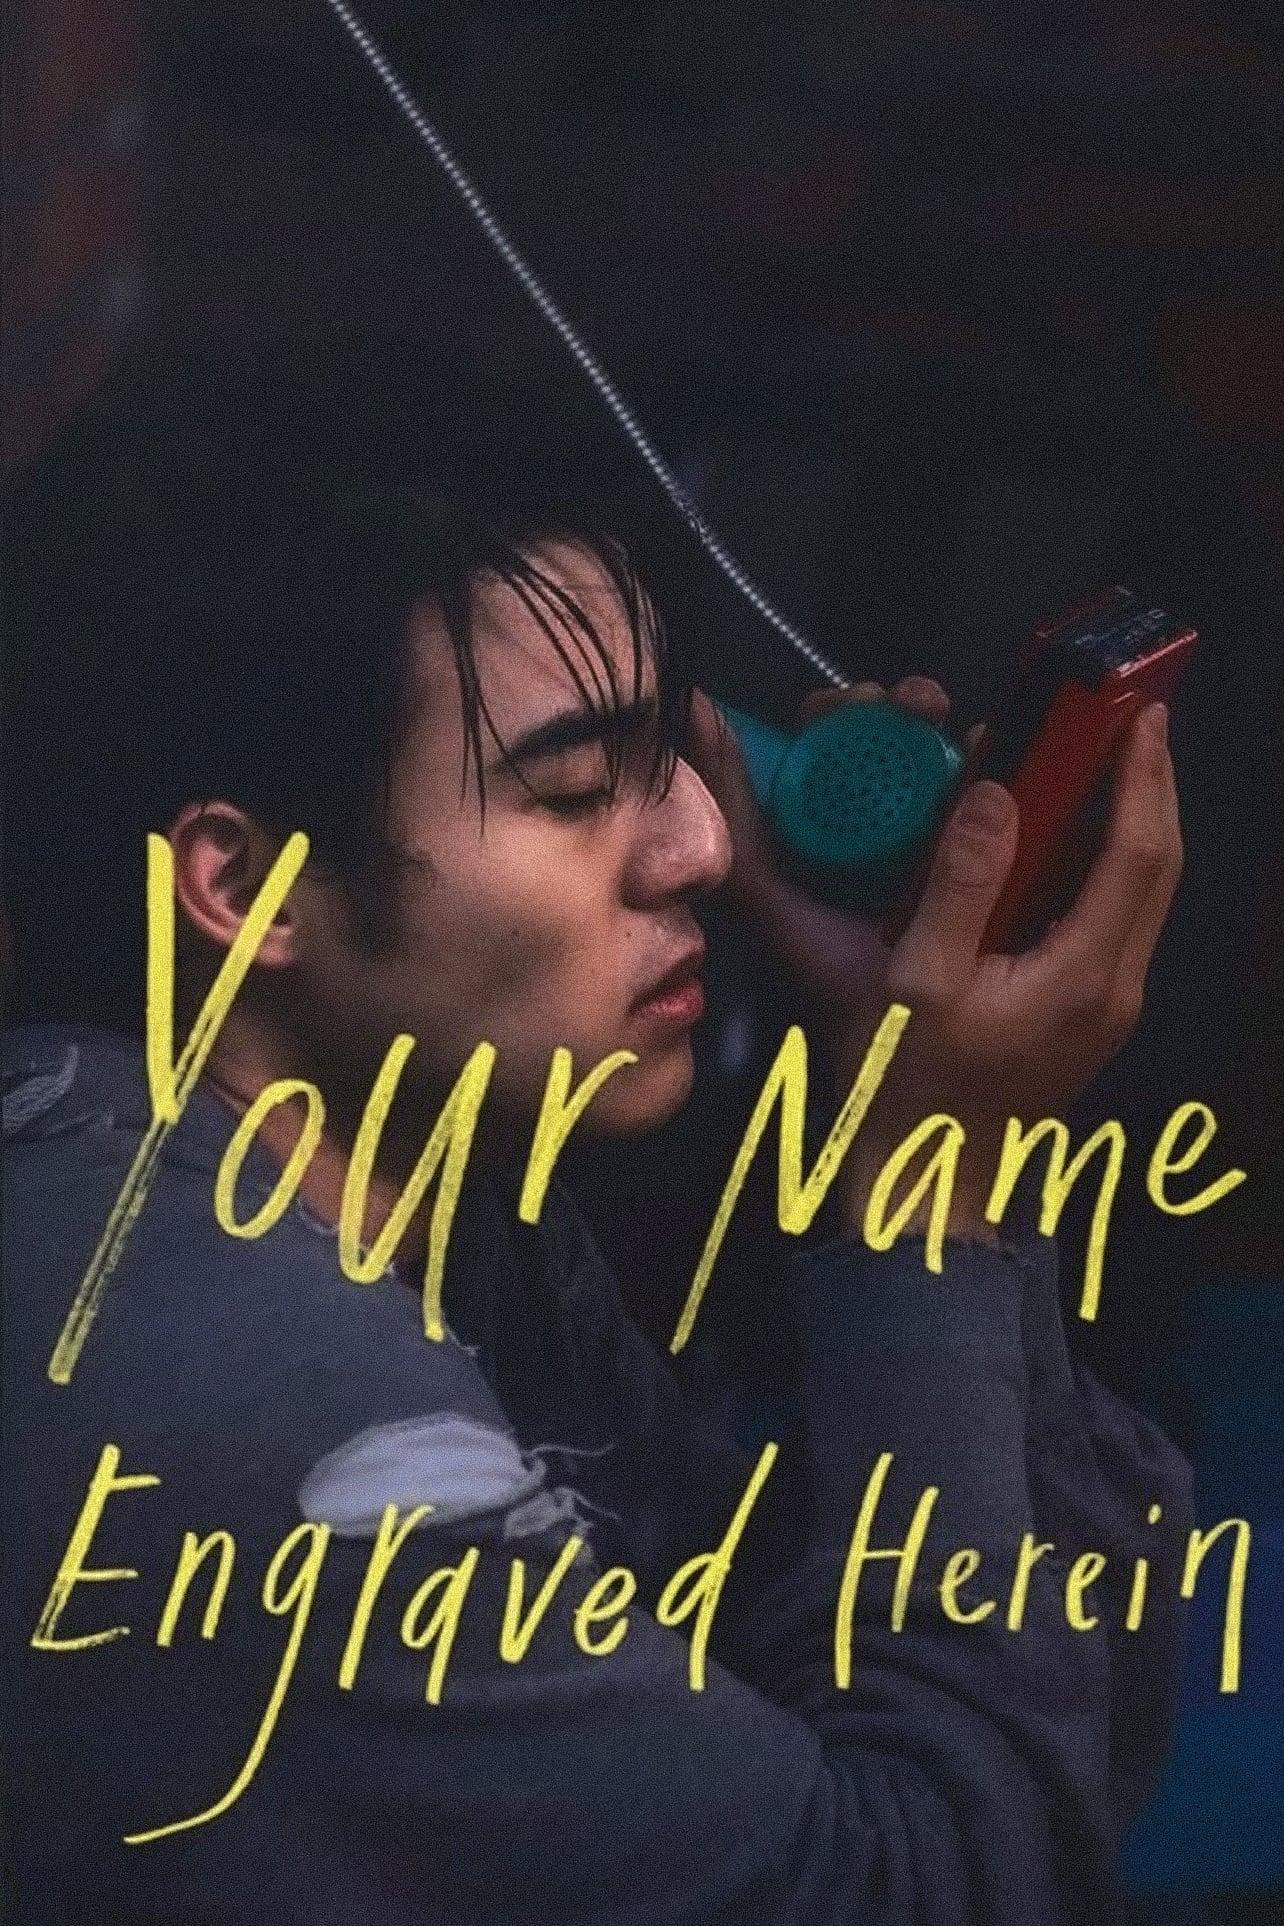 Your Name Engraved Herein poster